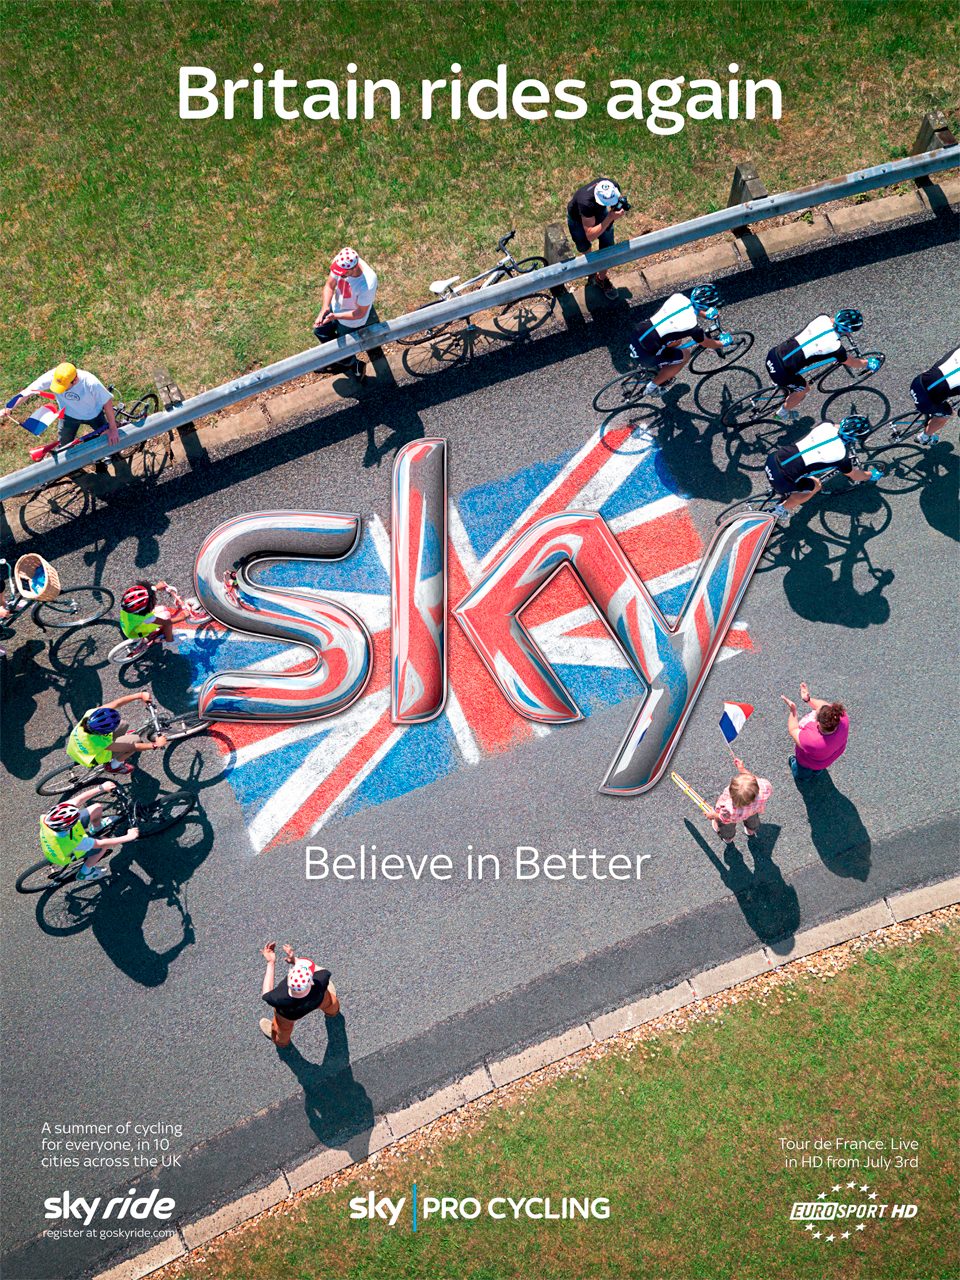 Sky Cycling Advertising Campaign